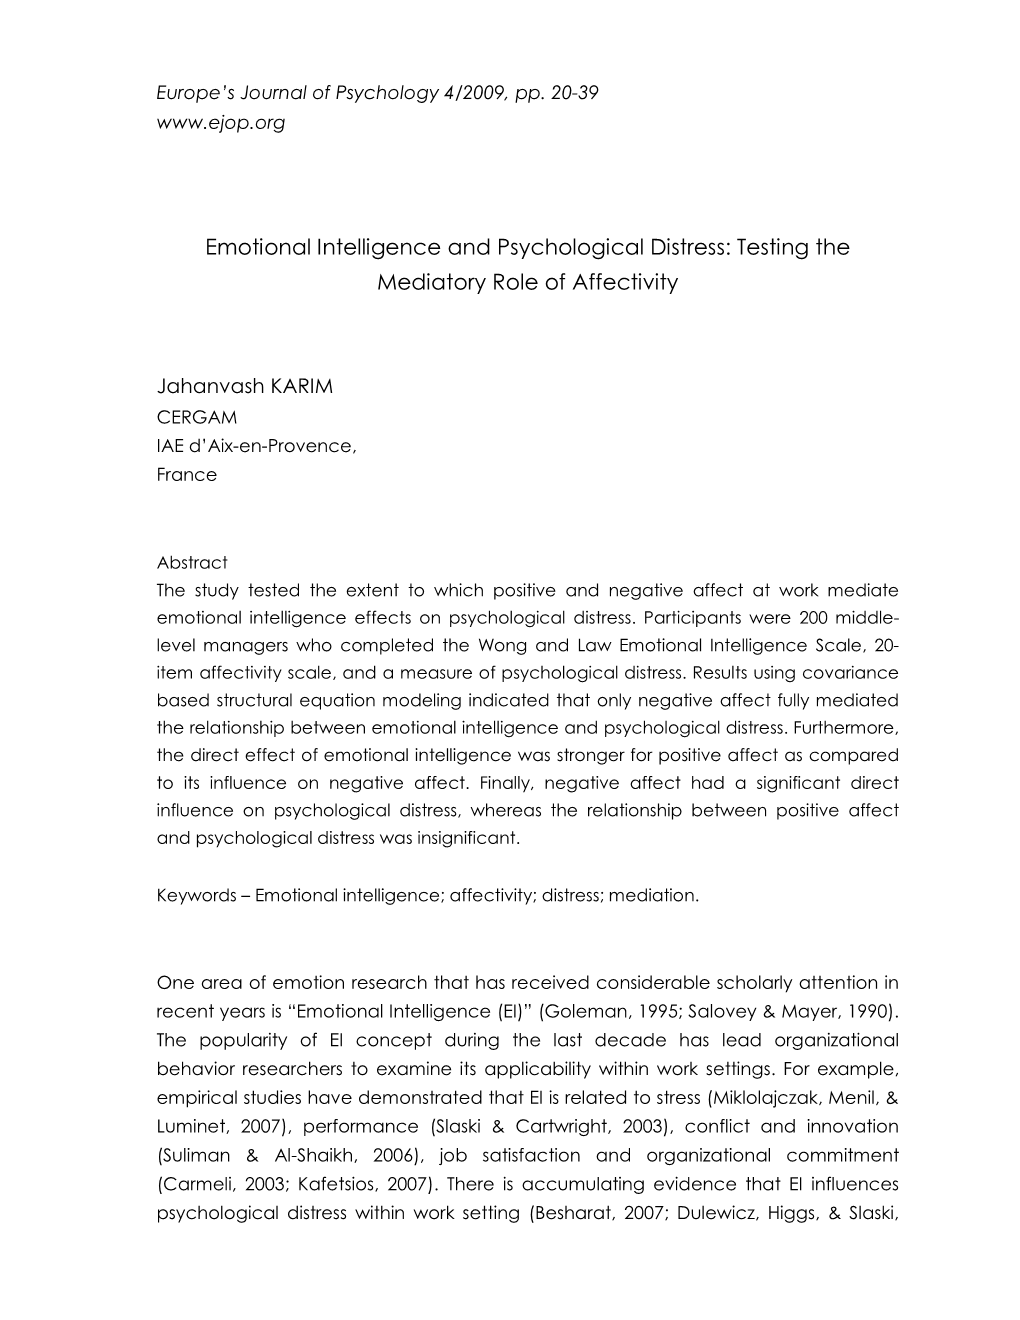 Emotional Intelligence and Psychological Distress: Testing the Mediatory Role of Affectivity